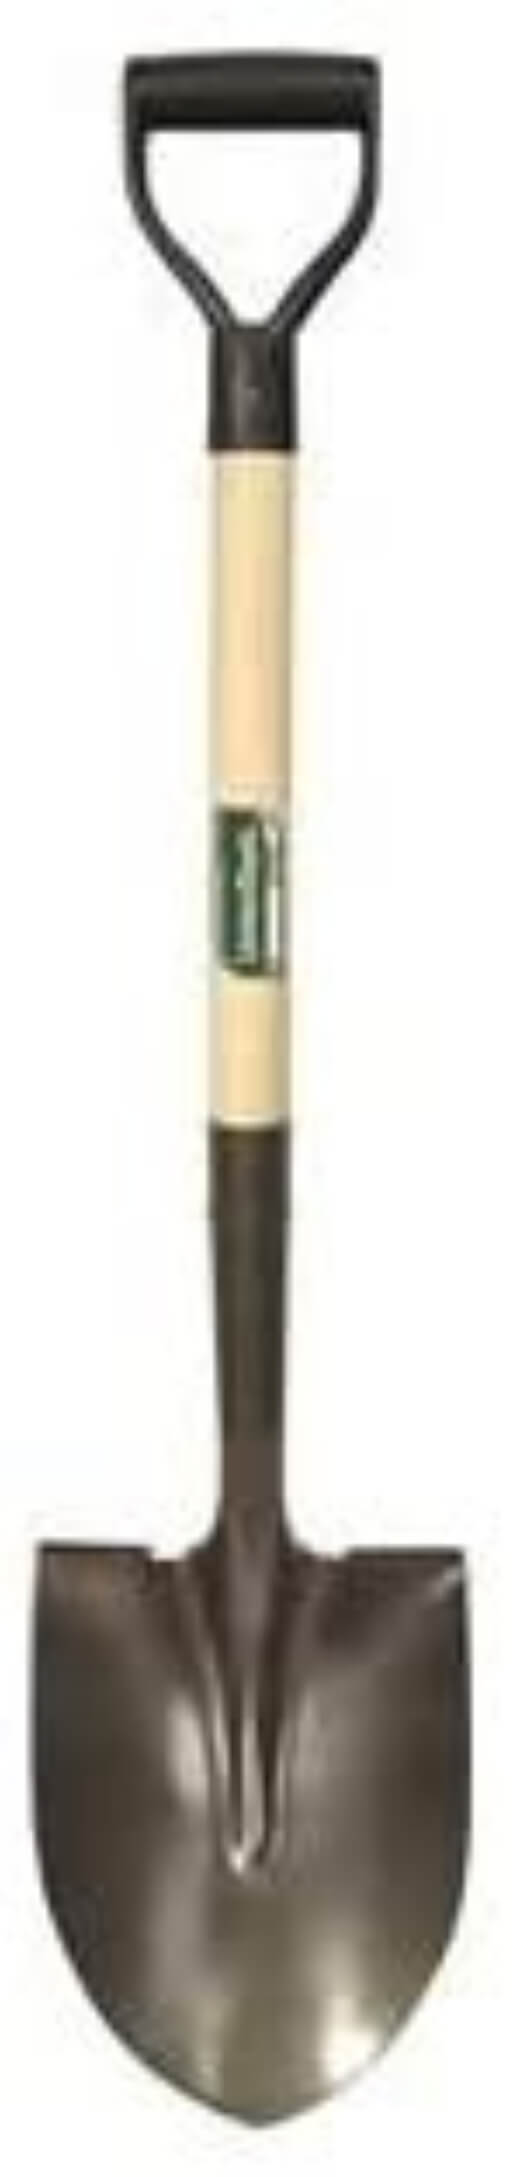 The Ames Companies, Inc 43106 Union Tools Poly D-Grip Round Point Shovel